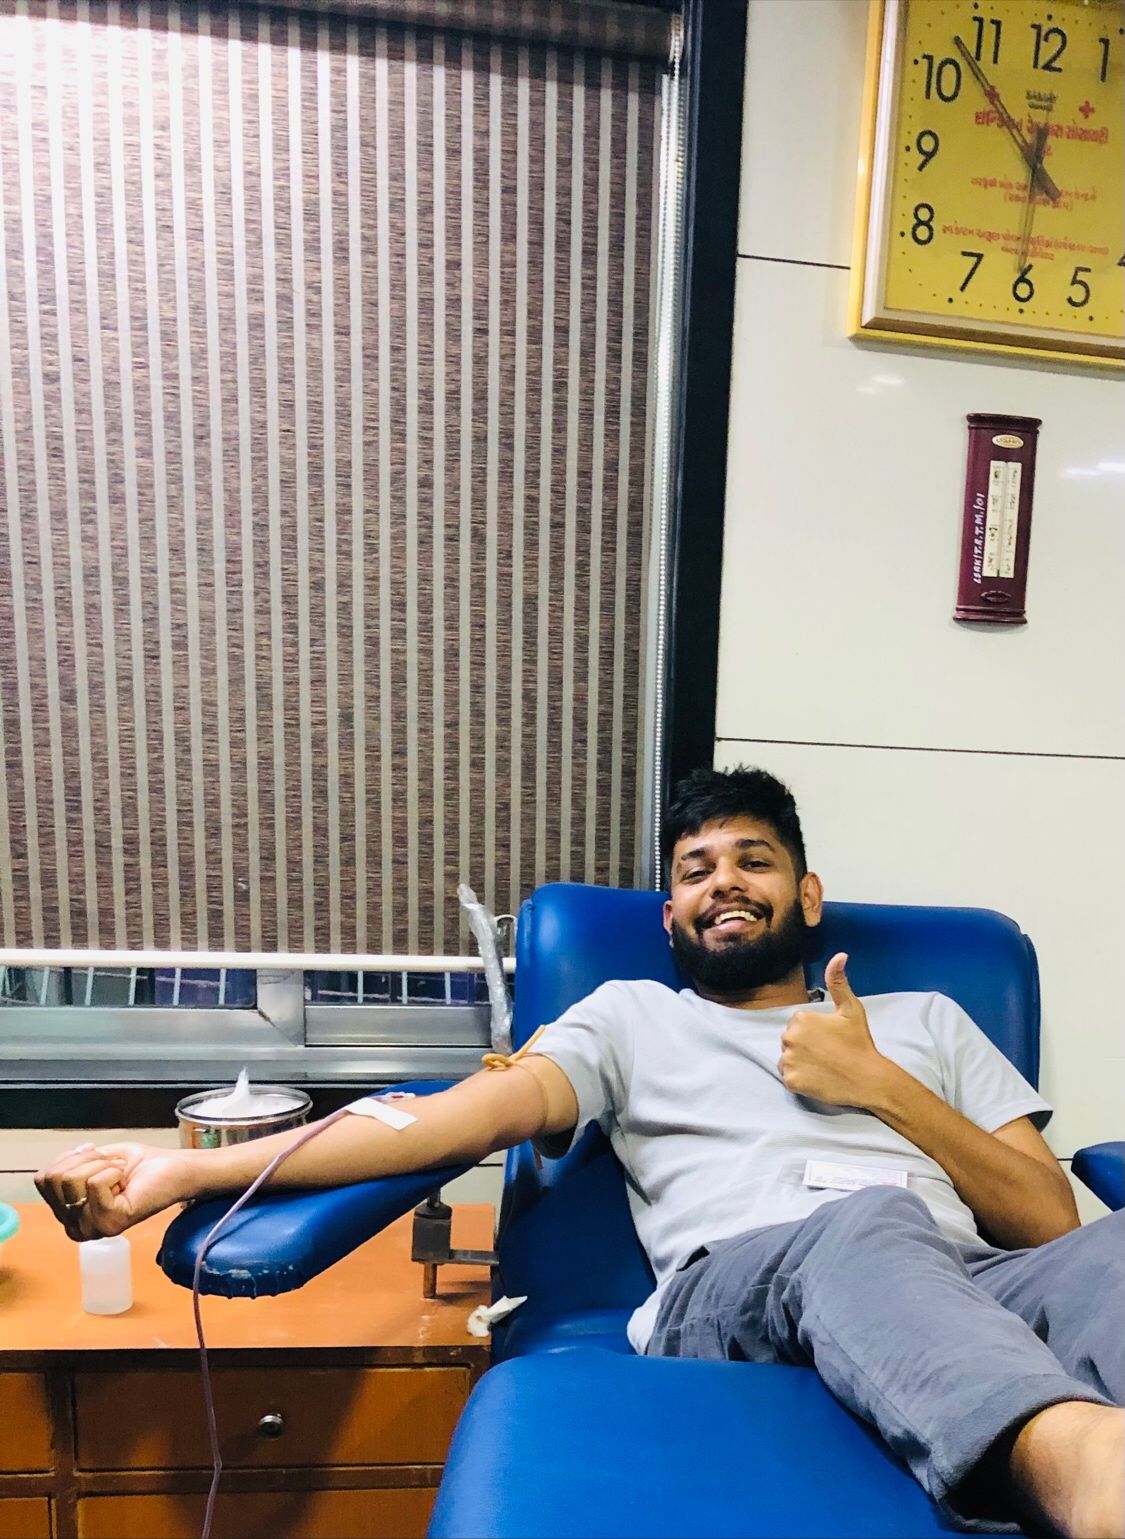 A note on solving the blood donors’ deficit in India